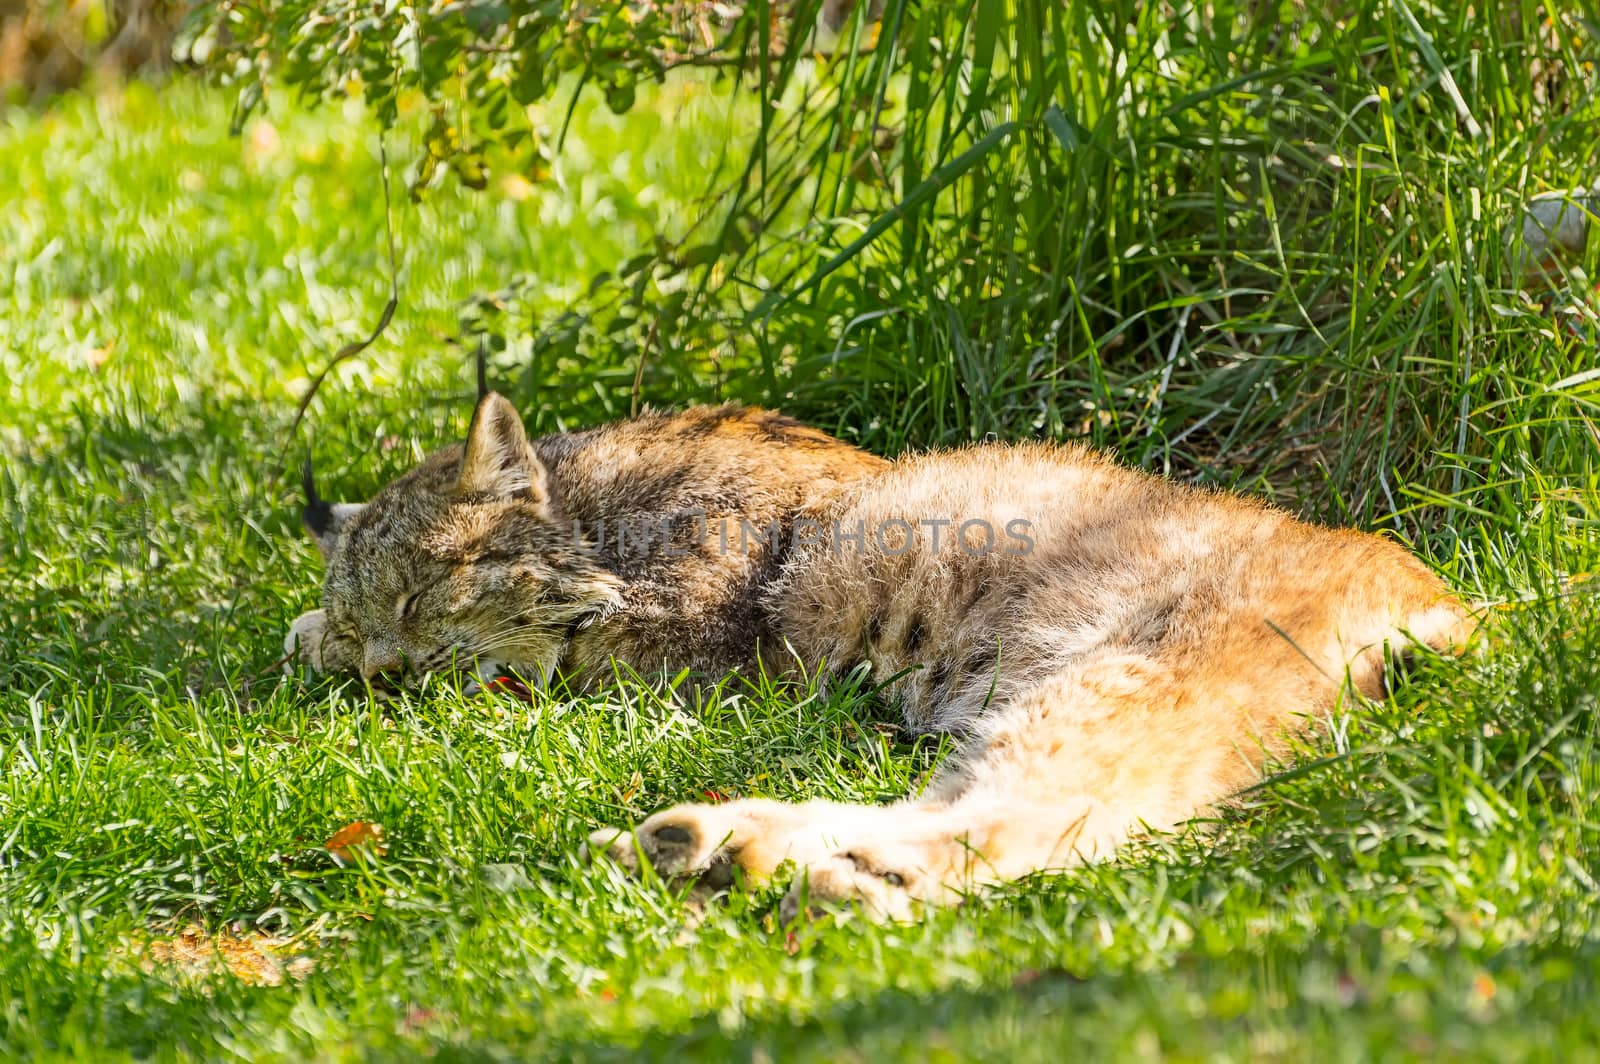 Lynx is sleeping in the shade to escape the afternoon warmth.